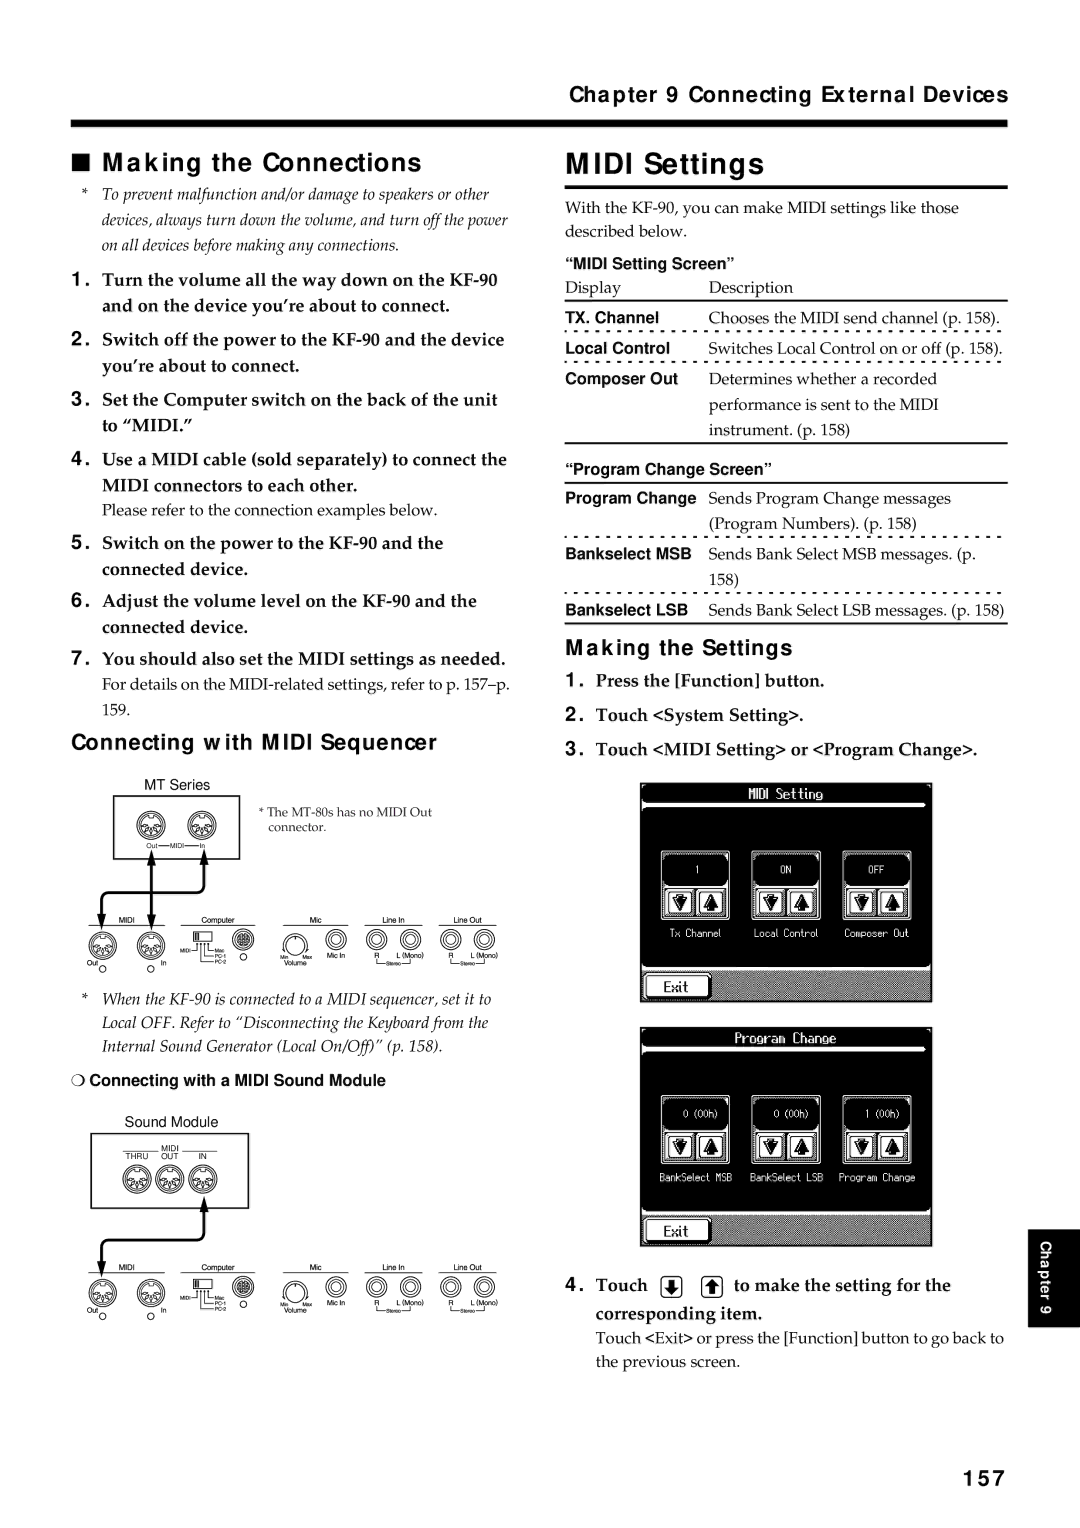 Roland KF-90 owner manual Midi Settings, Making the Connections 